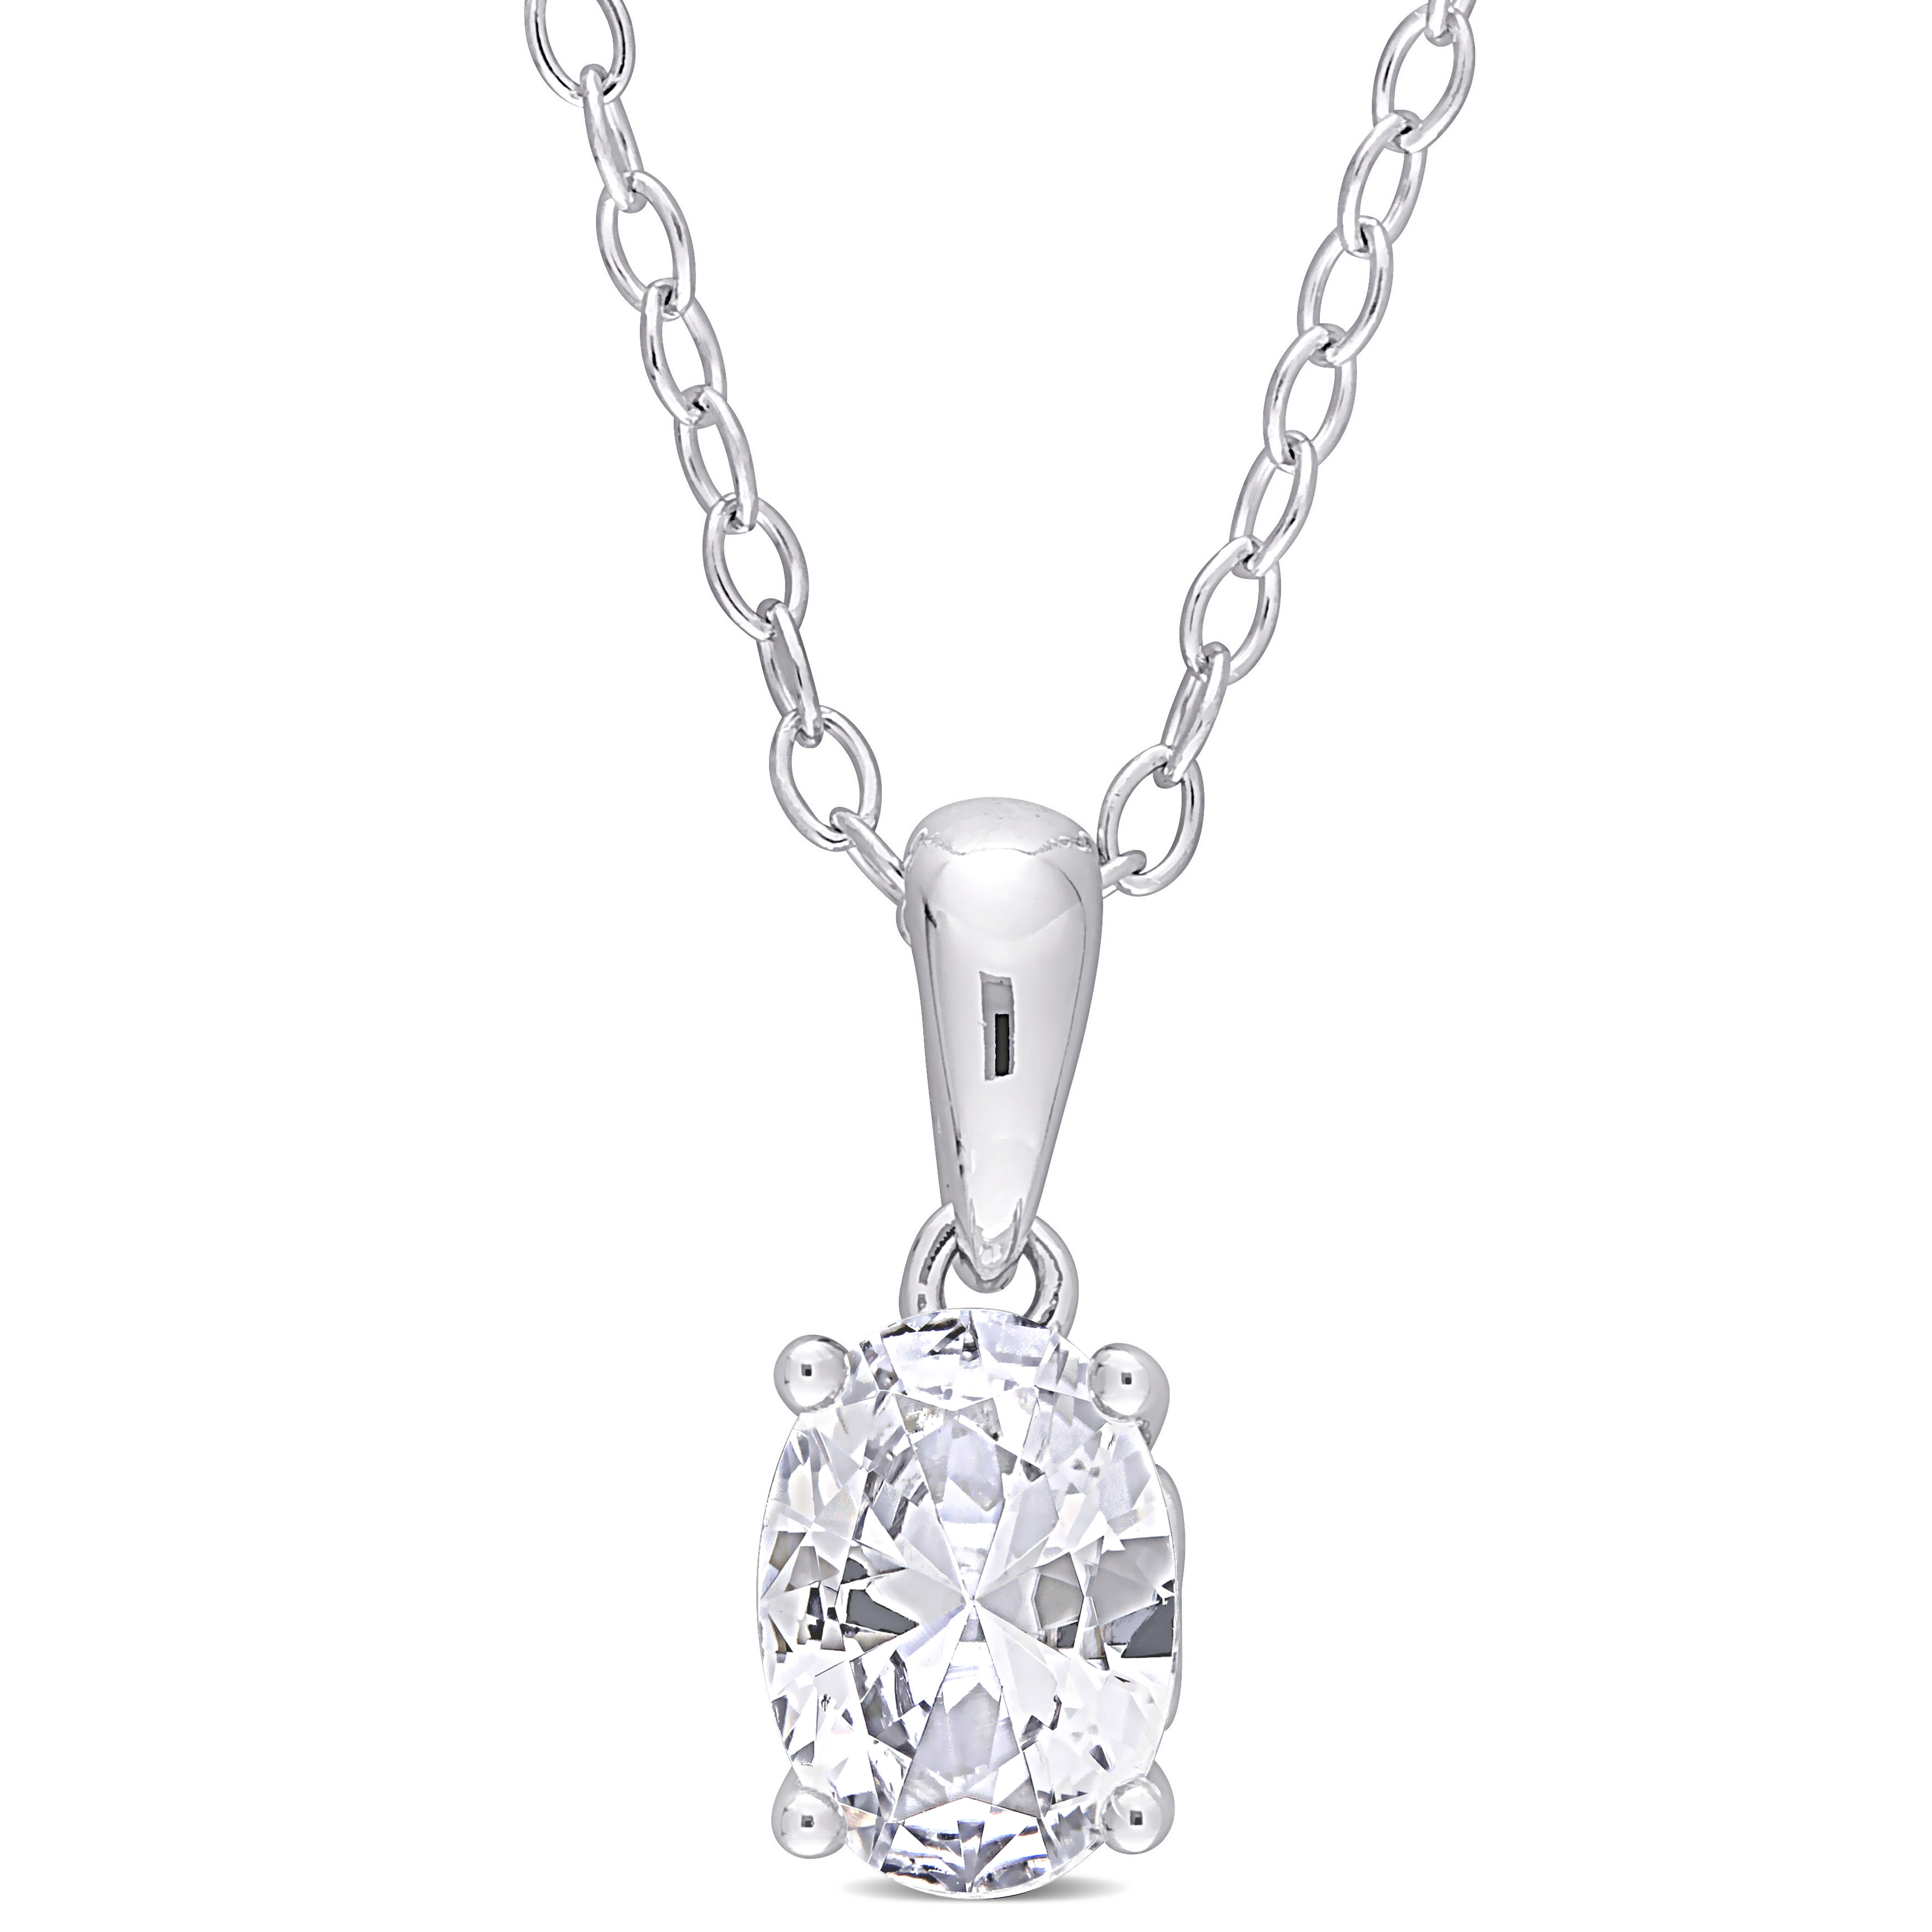 7/8 CT TGW Oval White Topaz Solitaire Heart Design Pendant with Chain in Sterling Silver - 18 in.